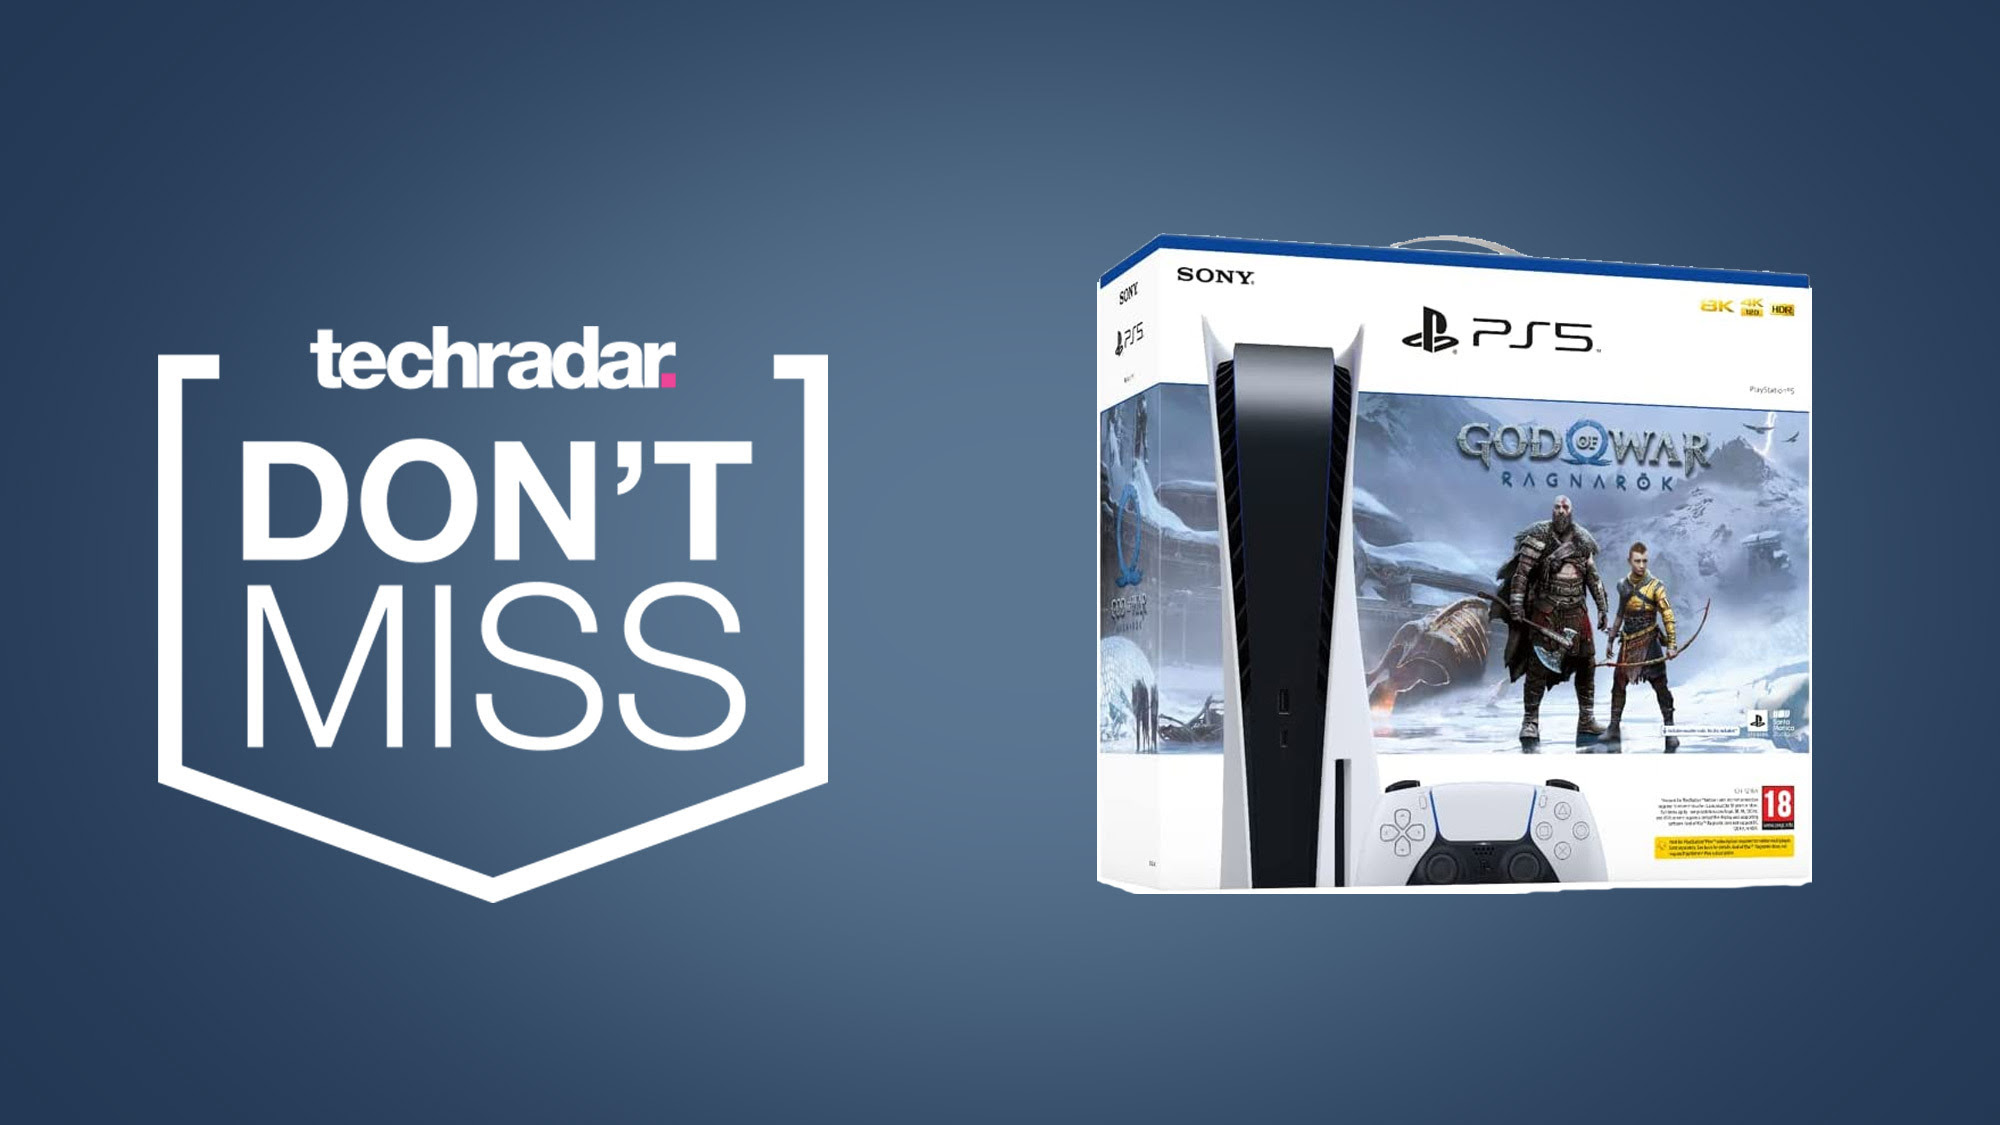 Get a PS5 and God of War Ragnarok for a new low price with this mega trade-in deal